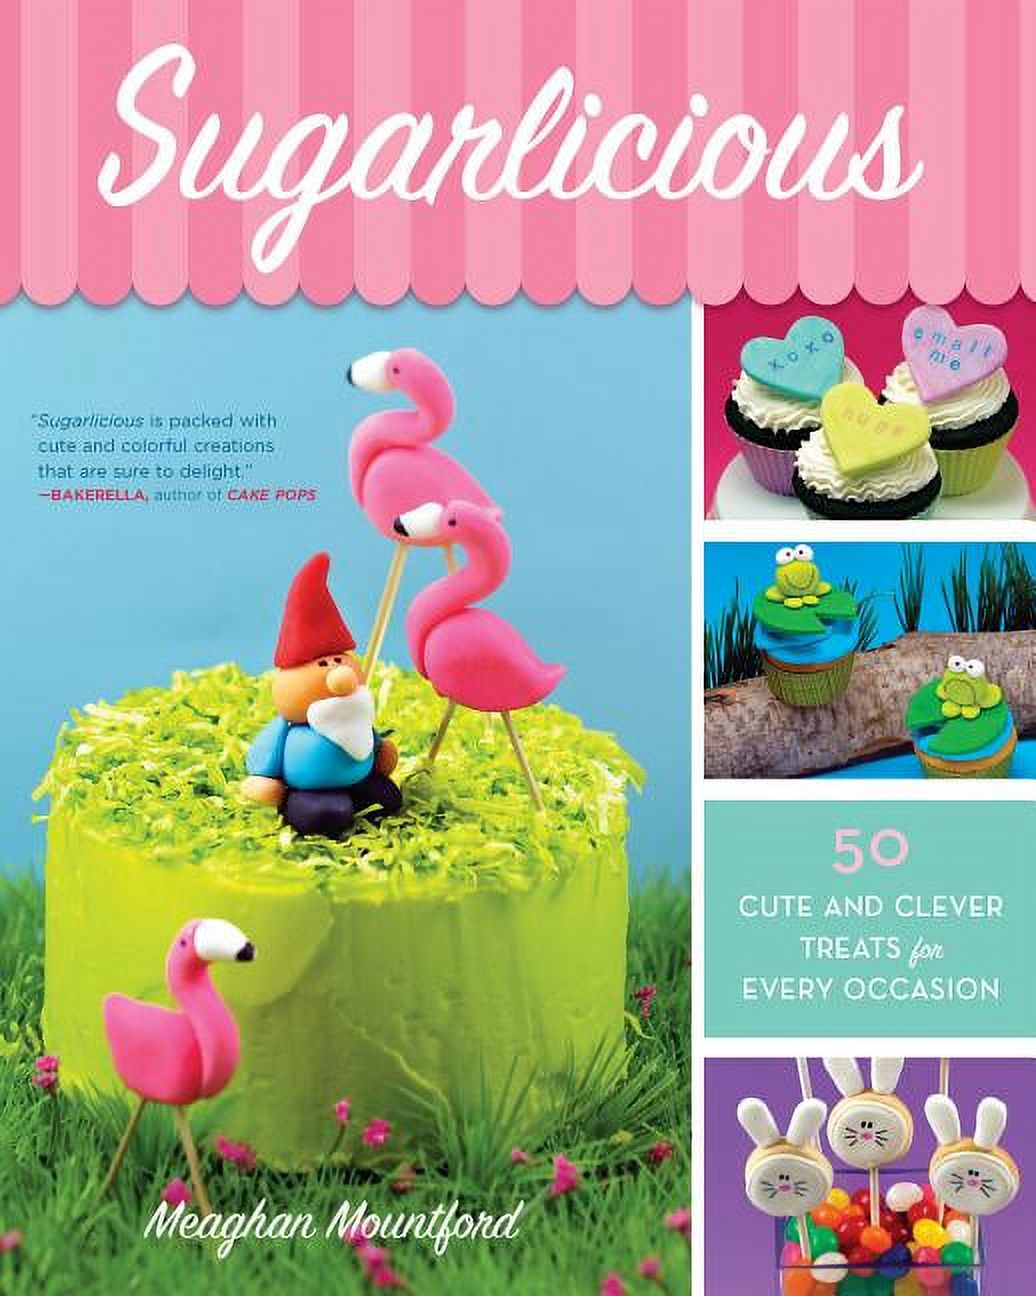 Sugarlicious : 50 Cute and Clever Treats for Every Occasion (Paperback) - image 1 of 1